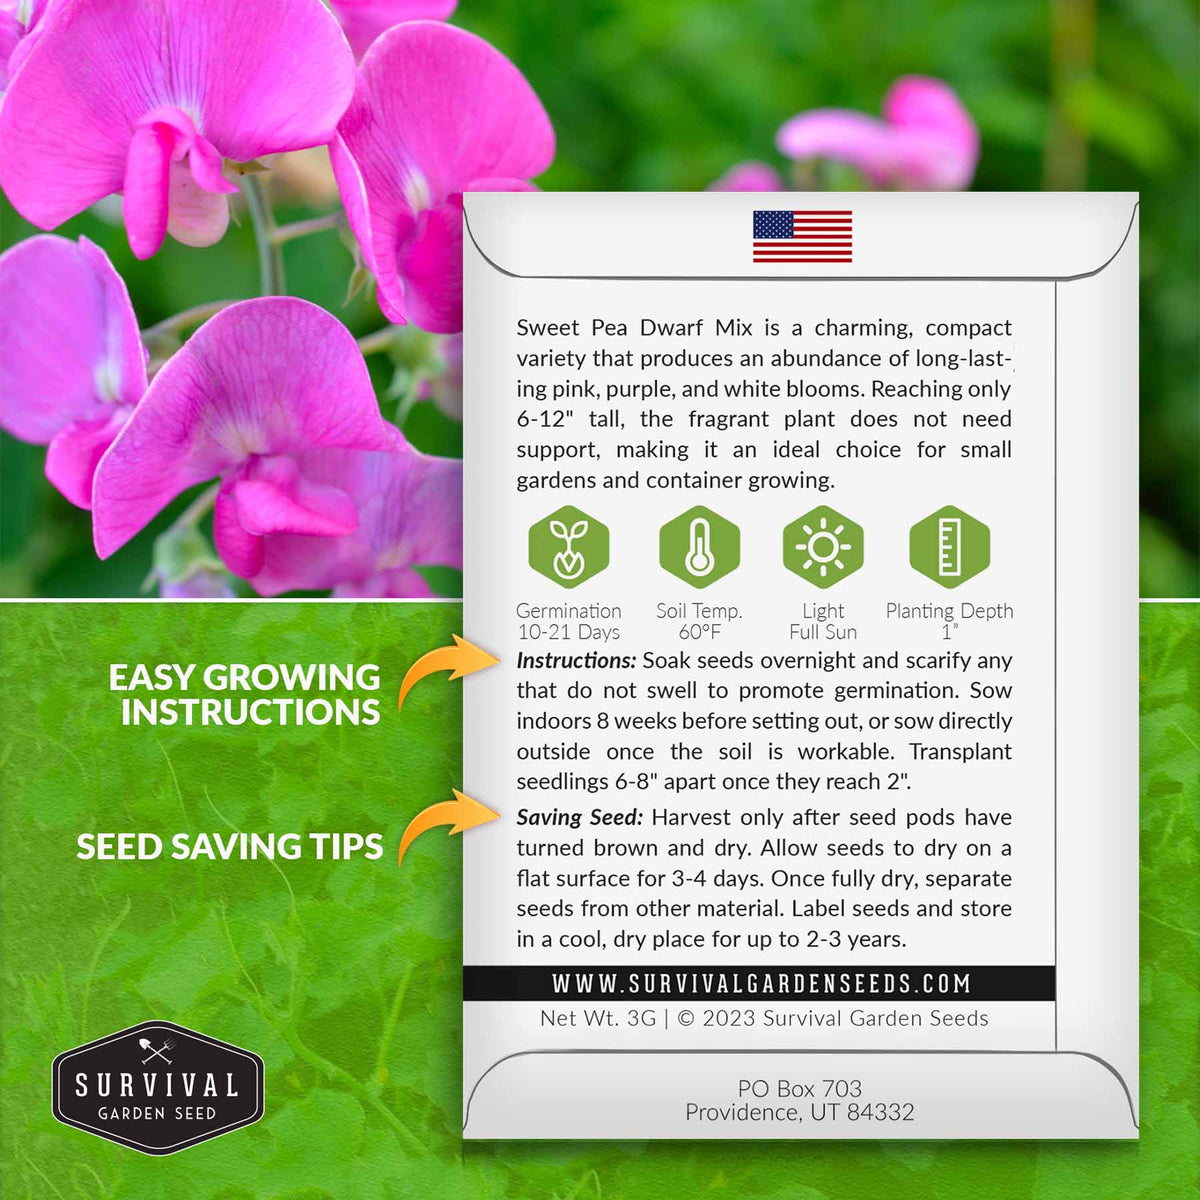 Sweet Pea seed growing instructions